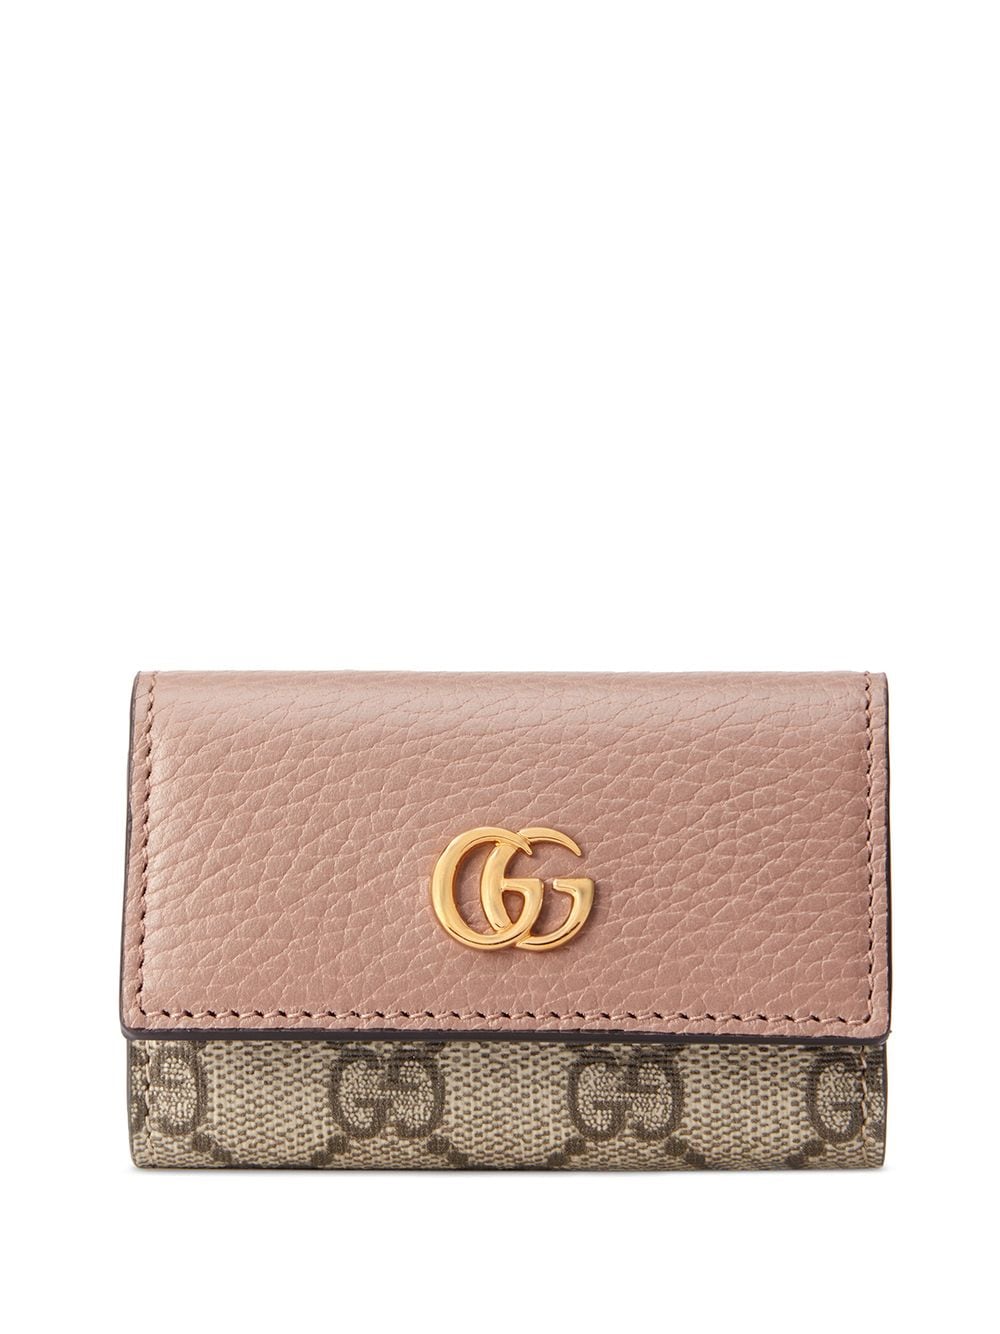 GUCCI Marmont GG Logo Leather 6 Ring Key Case